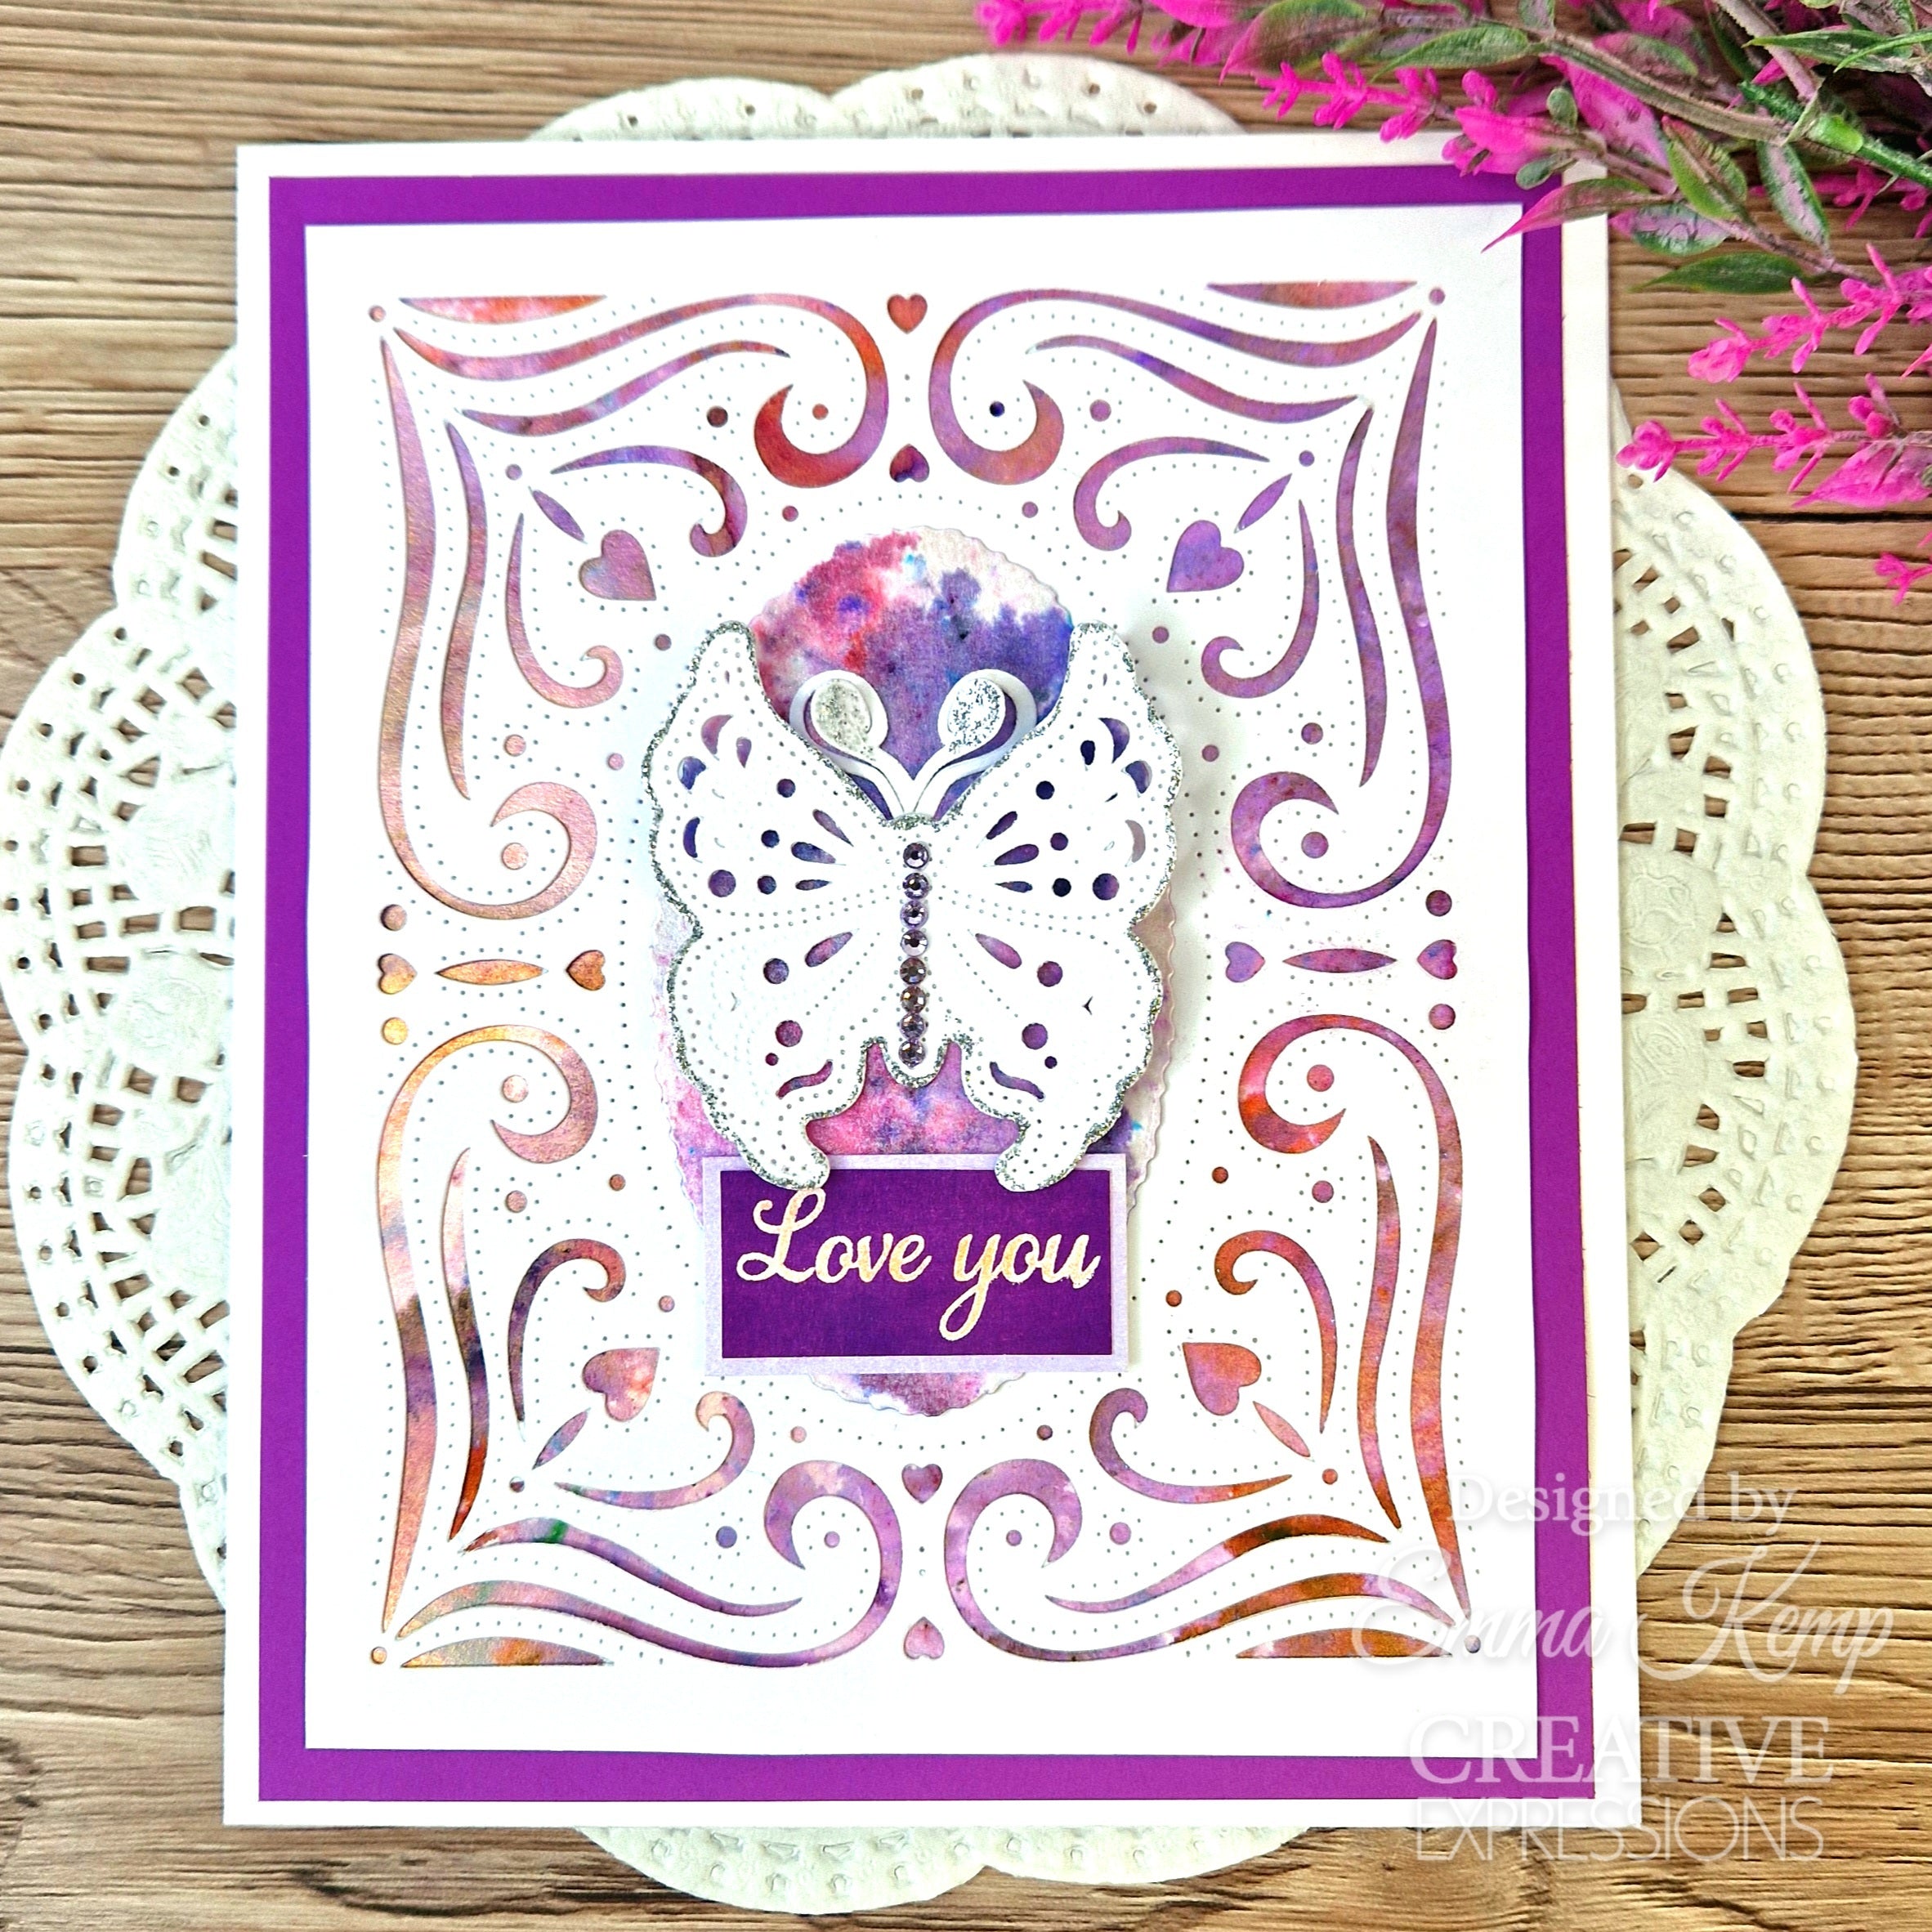 Creative Expressions Jamie Rodgers Oval Heart Frame Craft Die